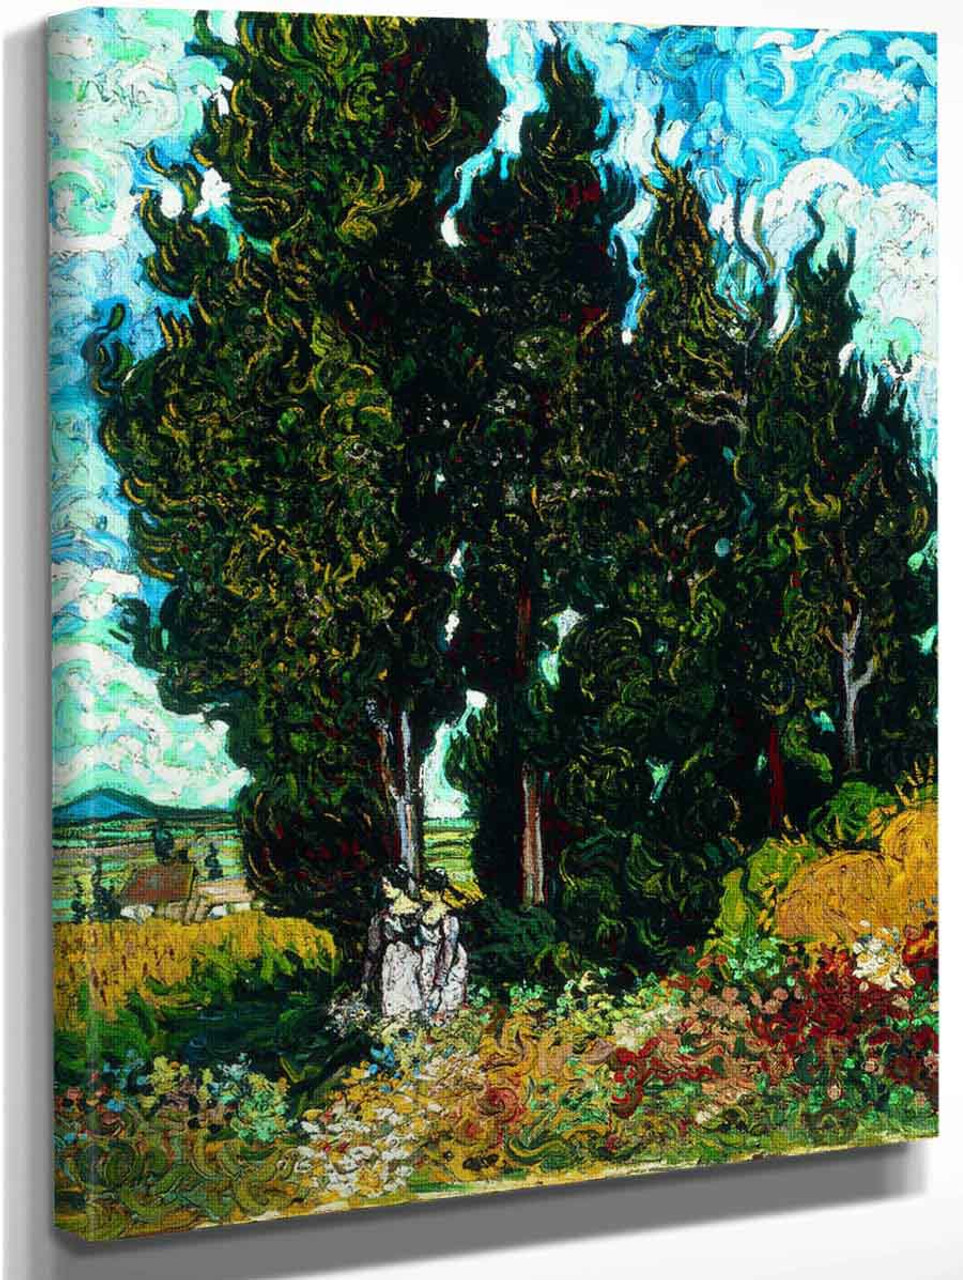 Cypresses With Two Women By Vincent Van Gogh Art Reproduction From Cutler Miles